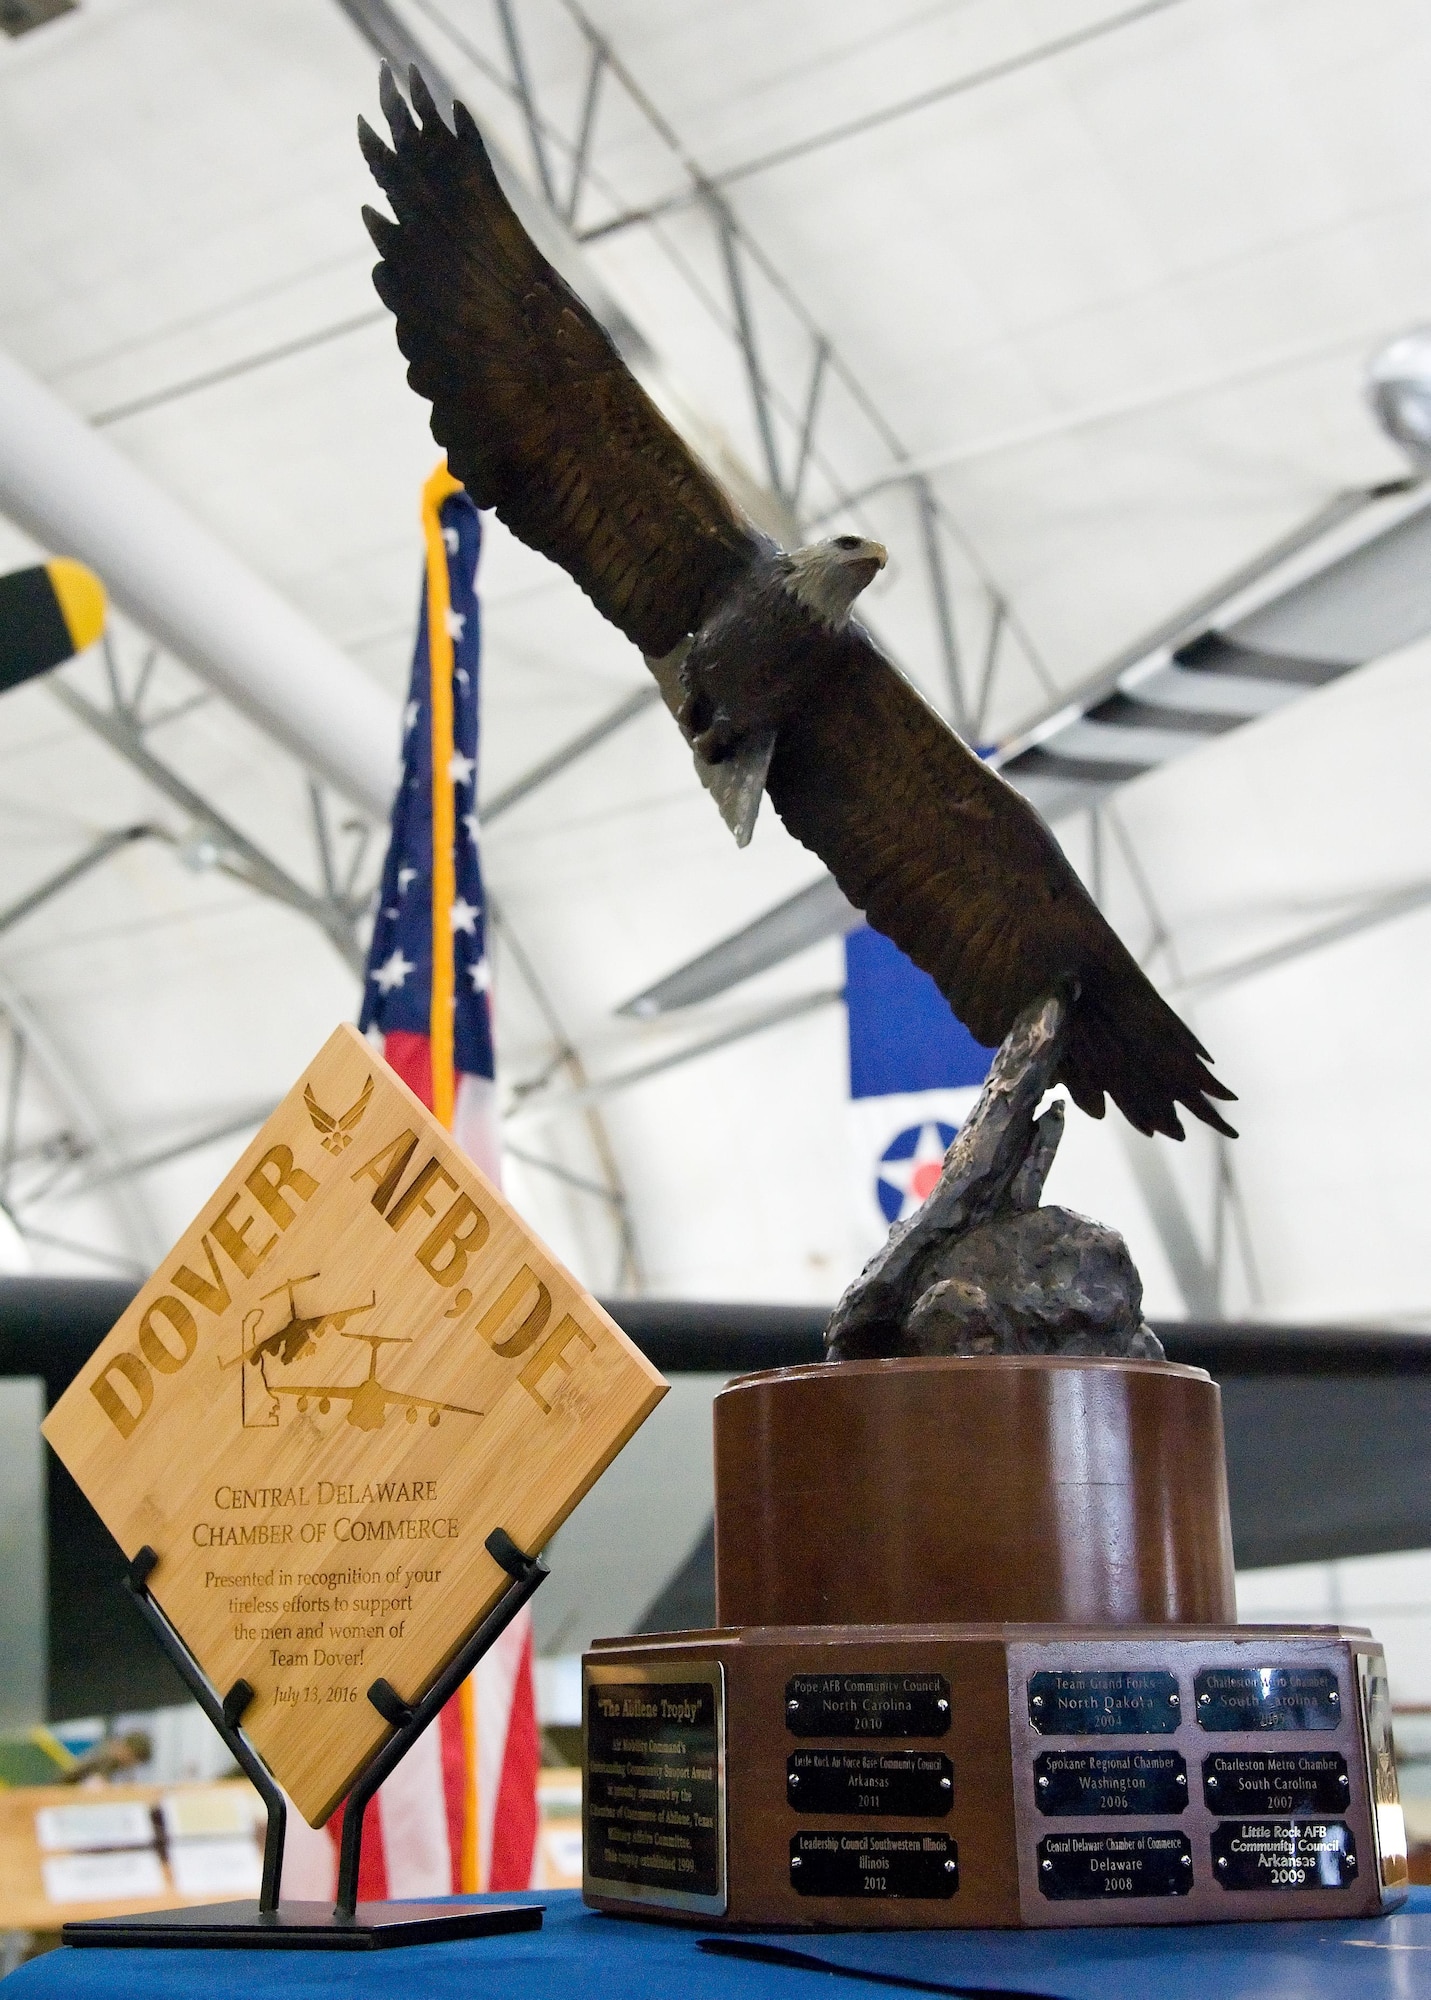 The Abilene Trophy sits on display during the trophy presentation July 13, 2016, at the AMC Museum on Dover Air Force Base, Del. The Central Delaware Chamber of Commerce was awarded the Abilene Trophy for outstanding support to a nearby Air Mobility Command base and has received this trophy in 1999, 2008, and 2015. (U.S. Air Force photo/Roland Balik)